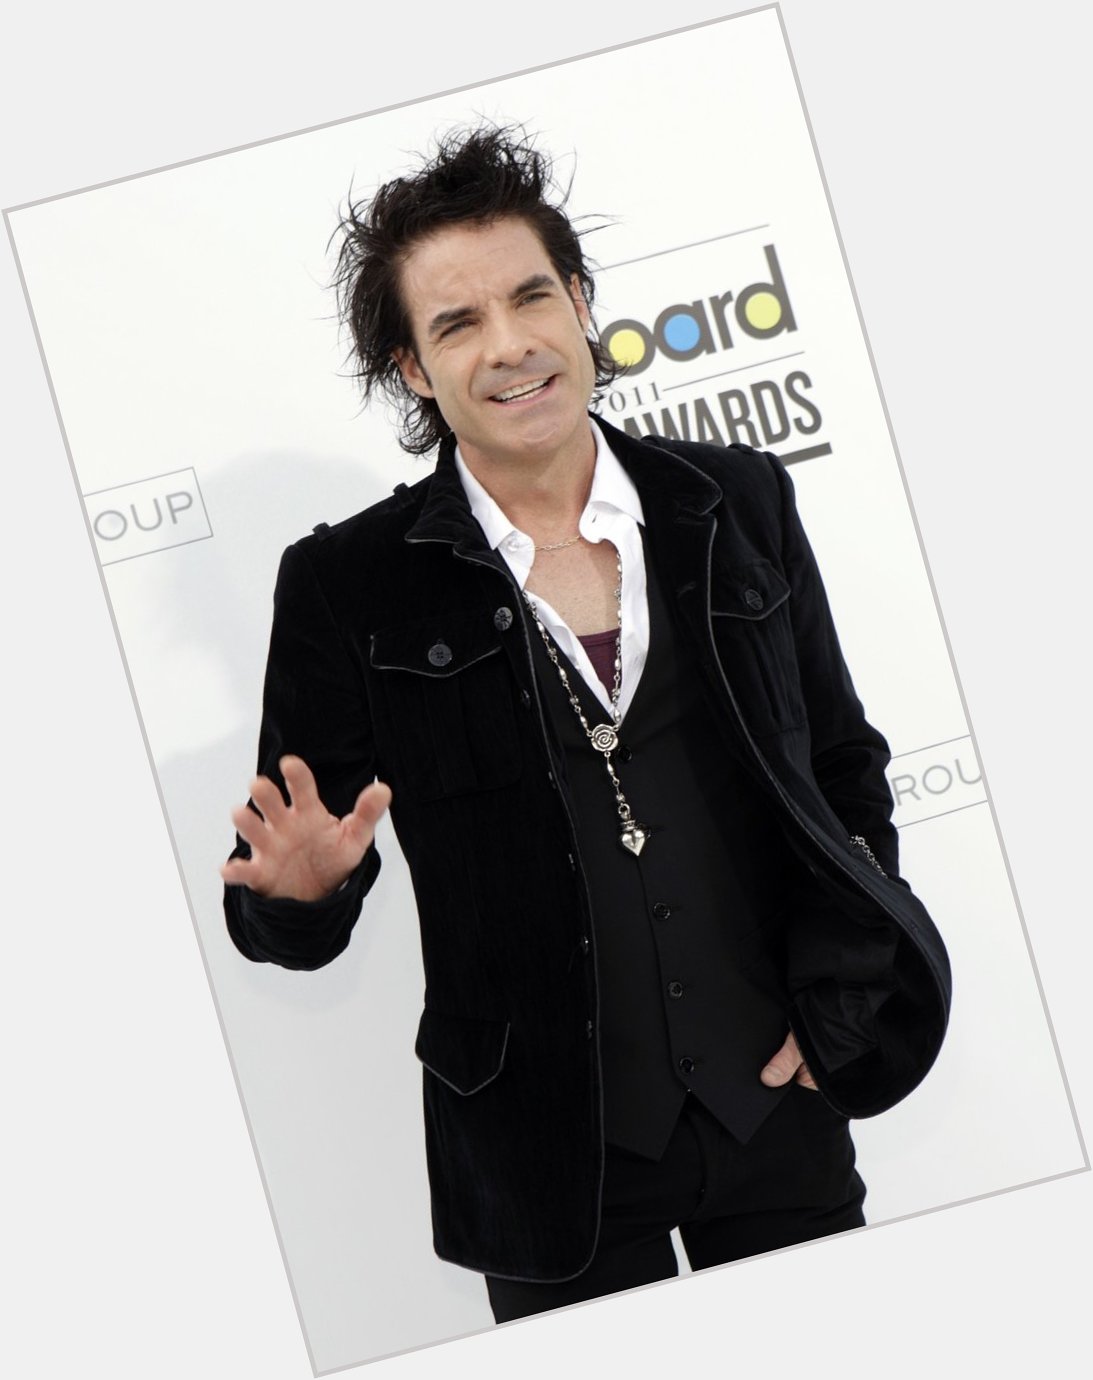 Huge happy birthday shoutout to singer Pat Monahan (Reuters Connect)! 